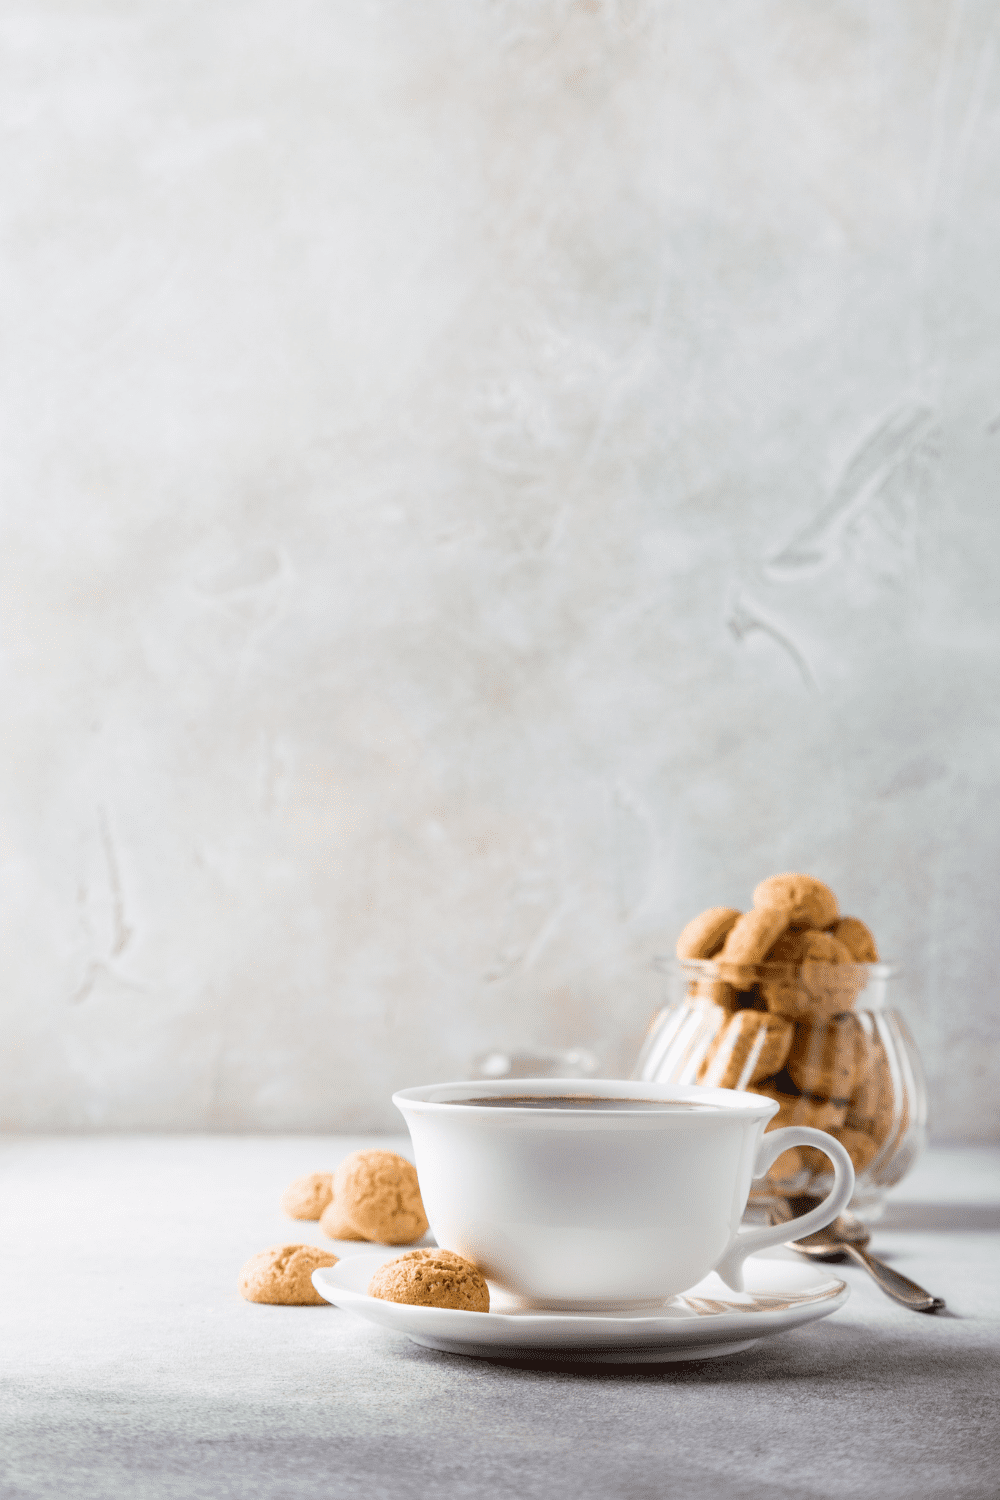 a cup of keto coffee served with keto almond flour cookies that are made with egg whites